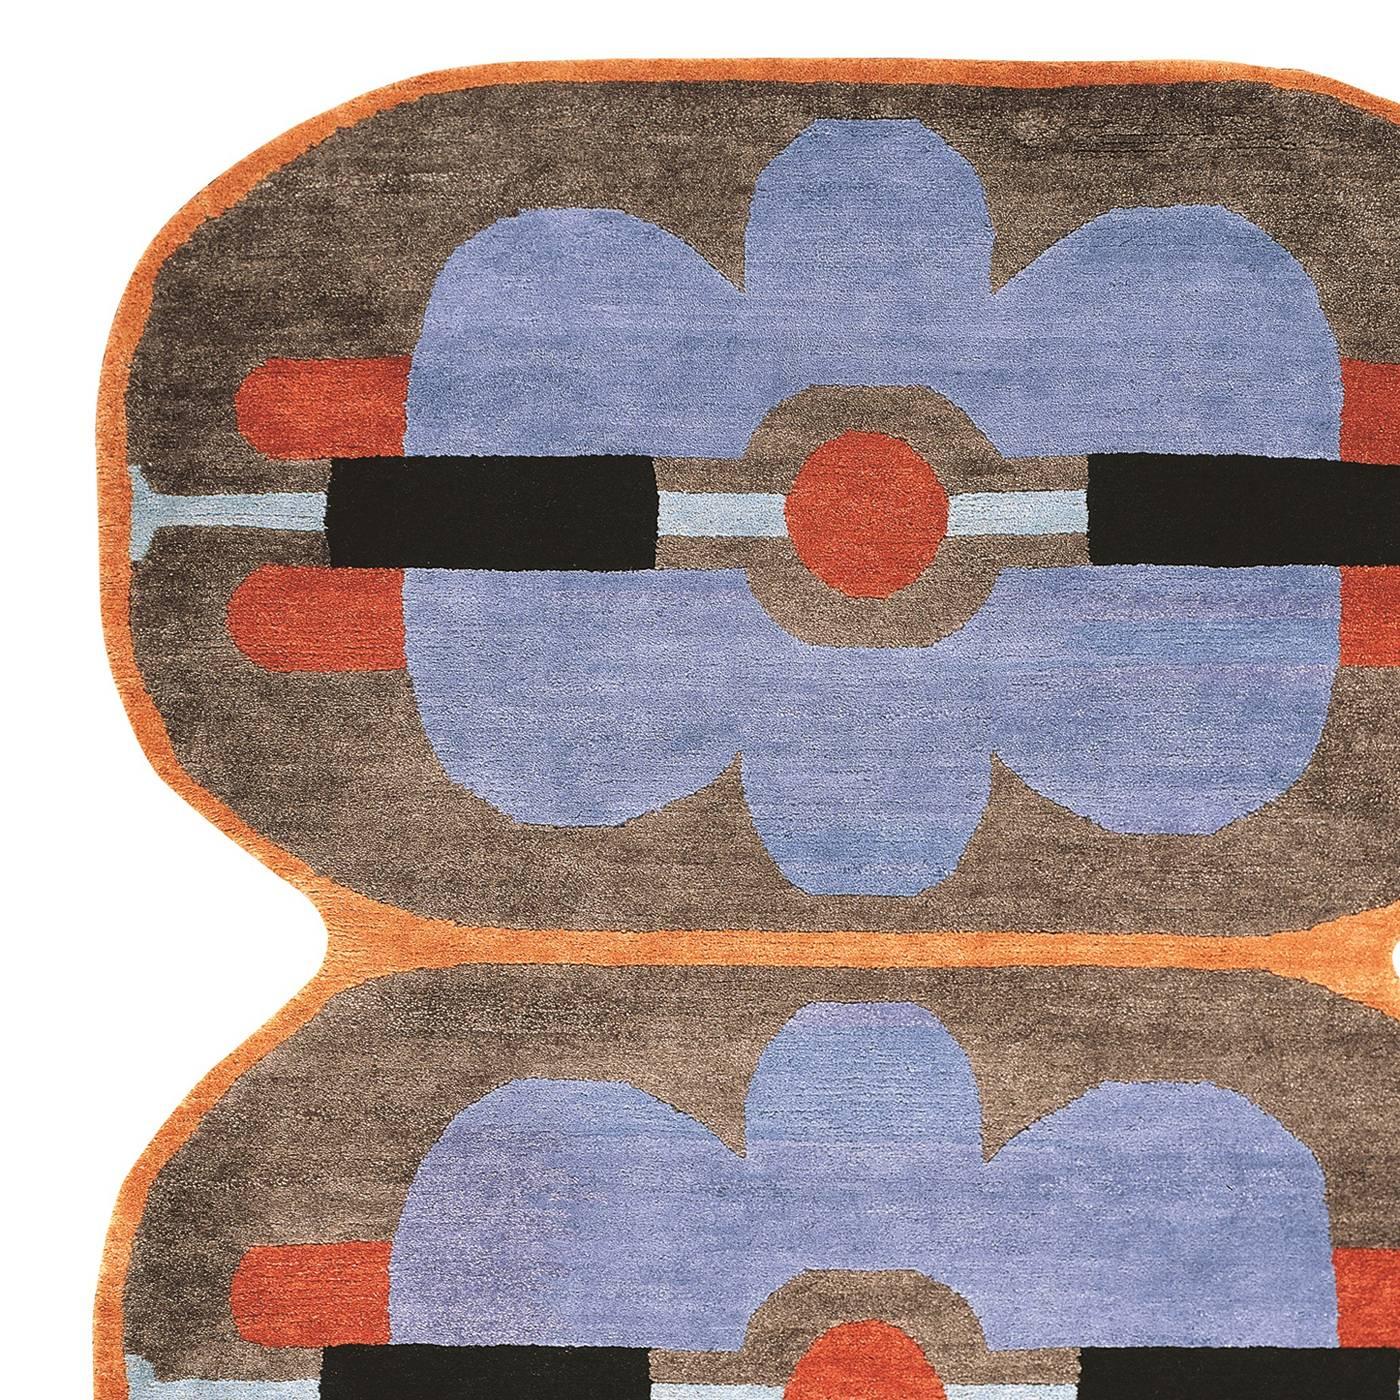 This striking carpet is part of a 36-piece limited series entirely handmade from the harvesting of the wool, to each step in the treatment of the wool till its spinning, from the knotting along with cotton to the final cleaning cycle, every phase in